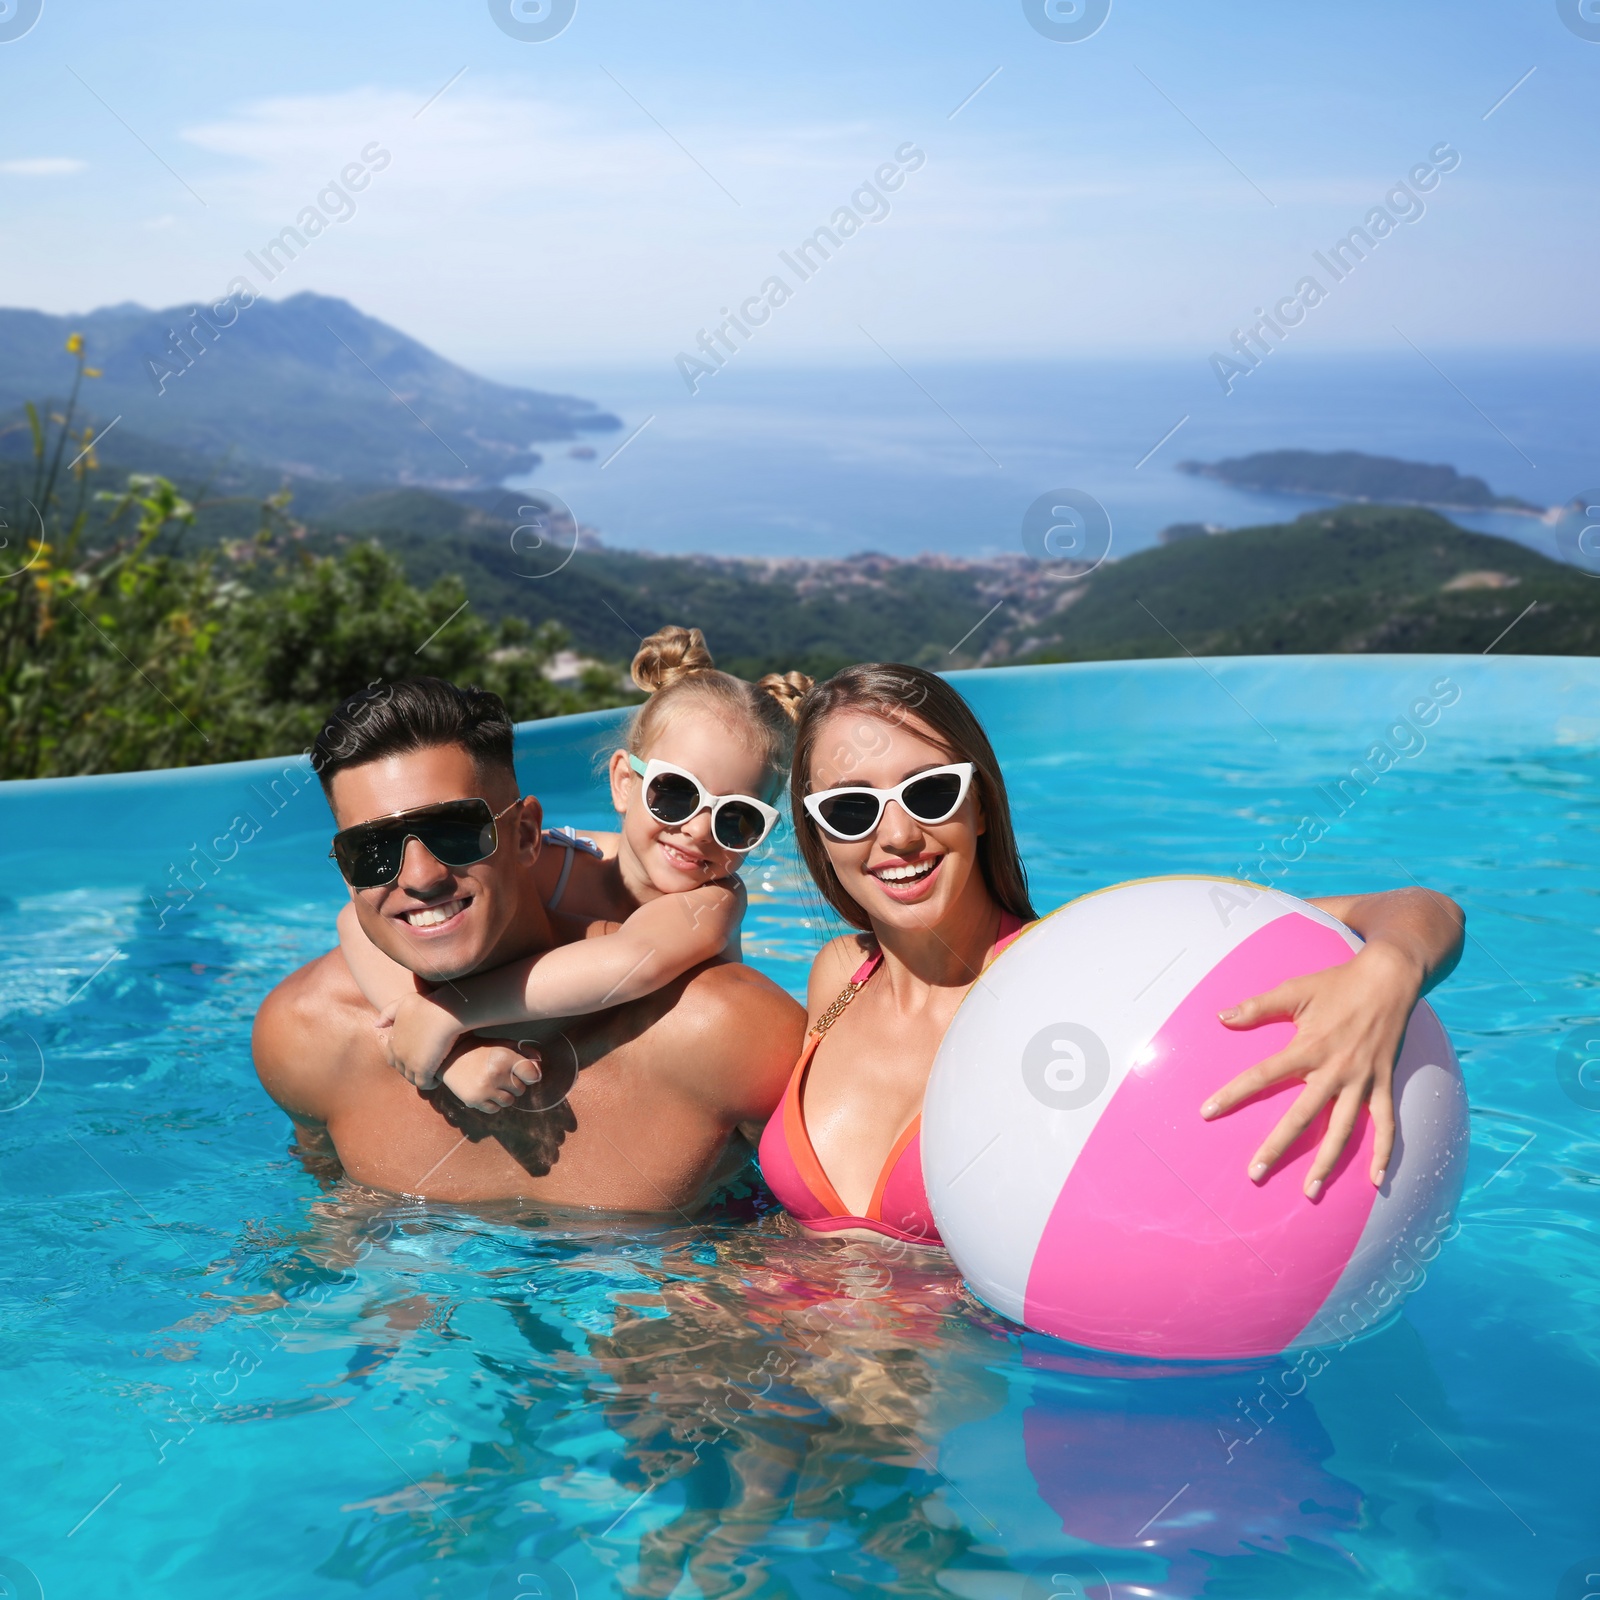 Image of Happy family with inflatable ball in outdoor swimming pool at luxury resort and beautiful view of mountains on sunny day